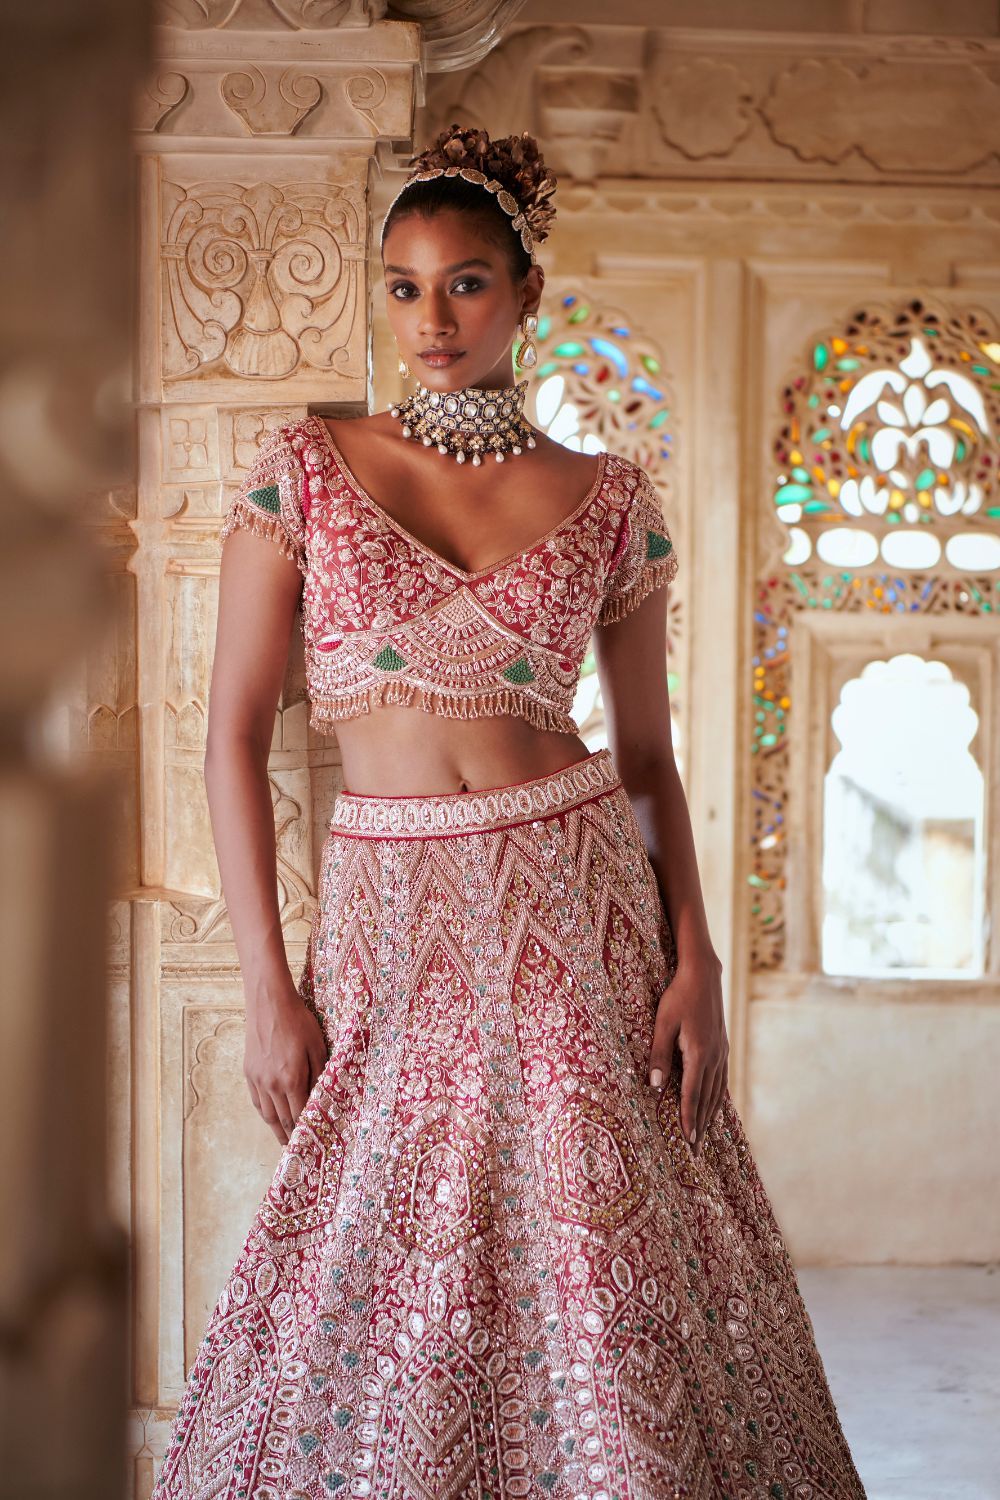 A Modern Bride's Guide To Buying Her Dream Bridal Lehenga | magicpin blog